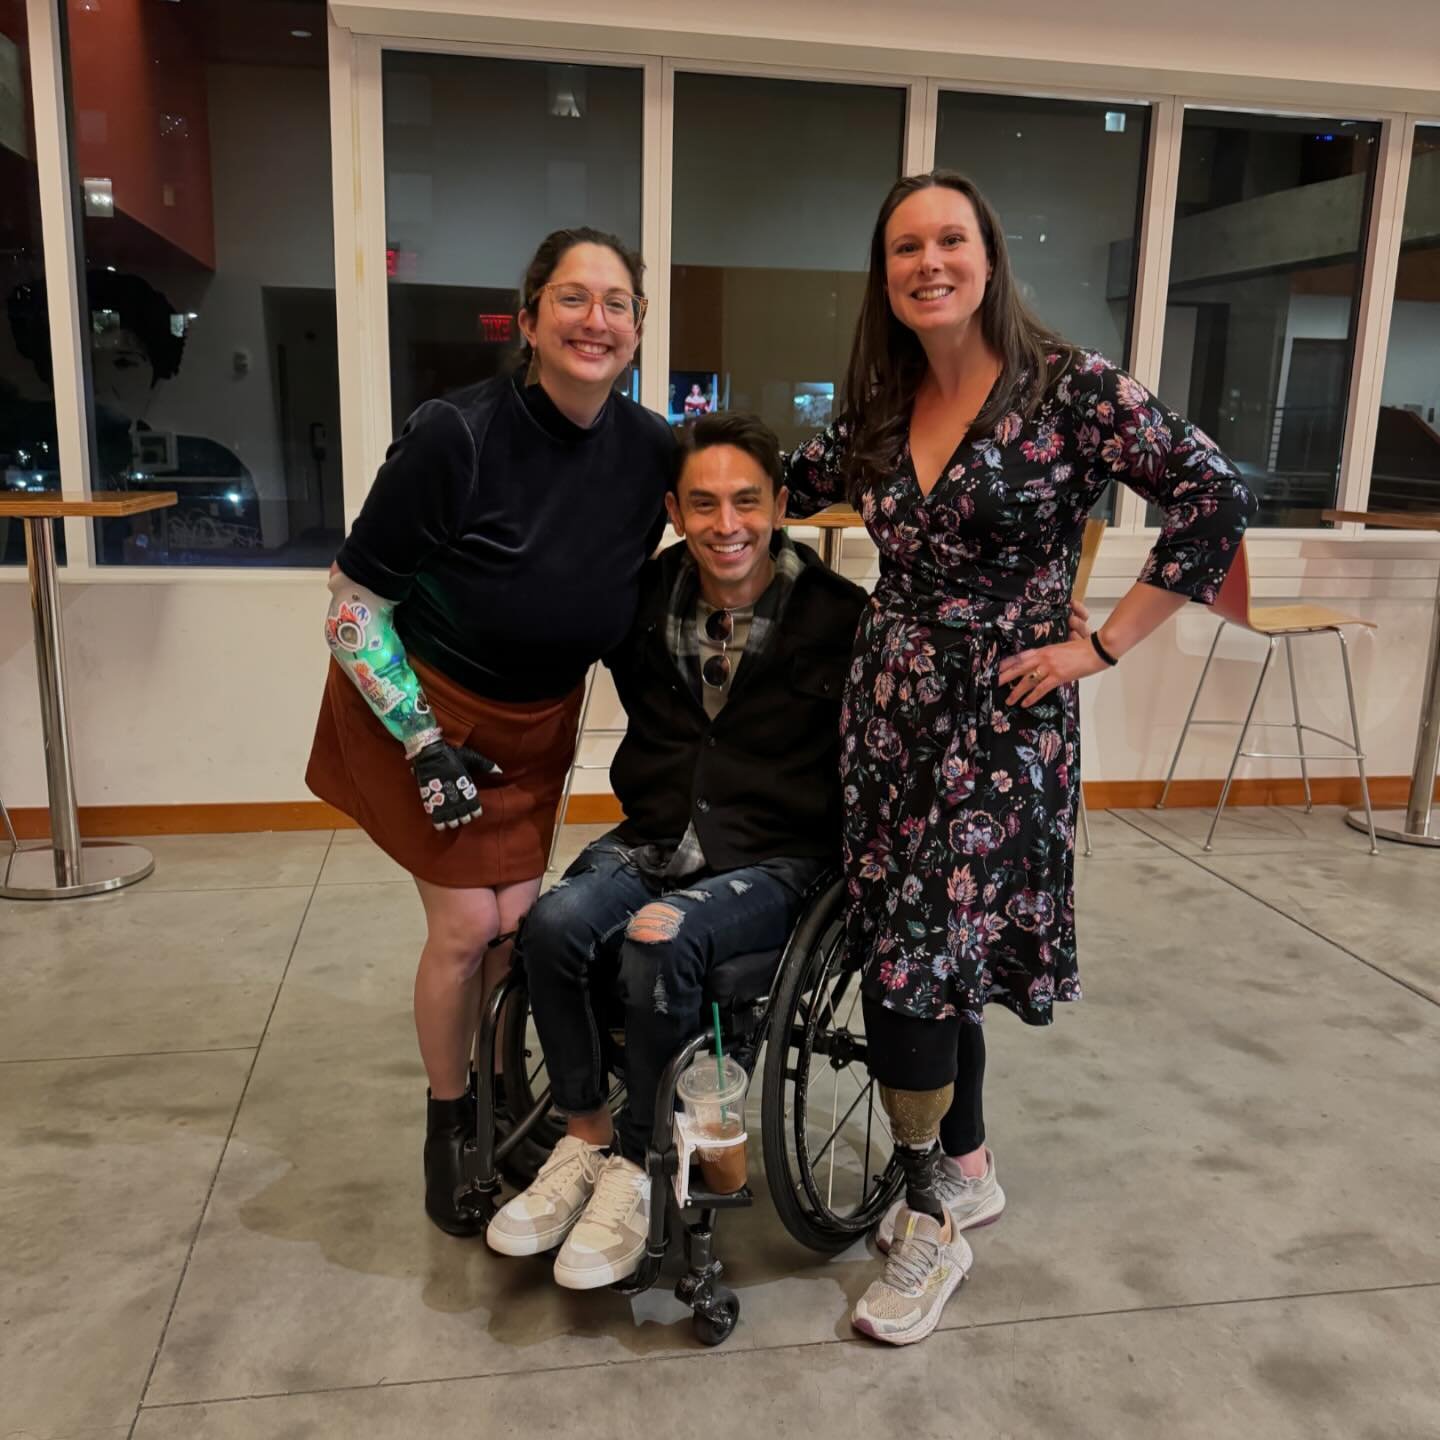 Swipe for disabled artists in entertainment then vs now. Also Mazel Tov @dannyjgomezofficial on your incredible *NYC DEBUT*!!

IMG descriptions:
1)A smiling trio after &ldquo;All of Me&rdquo; From left to right, Melanie a right arm amputee wears a mu